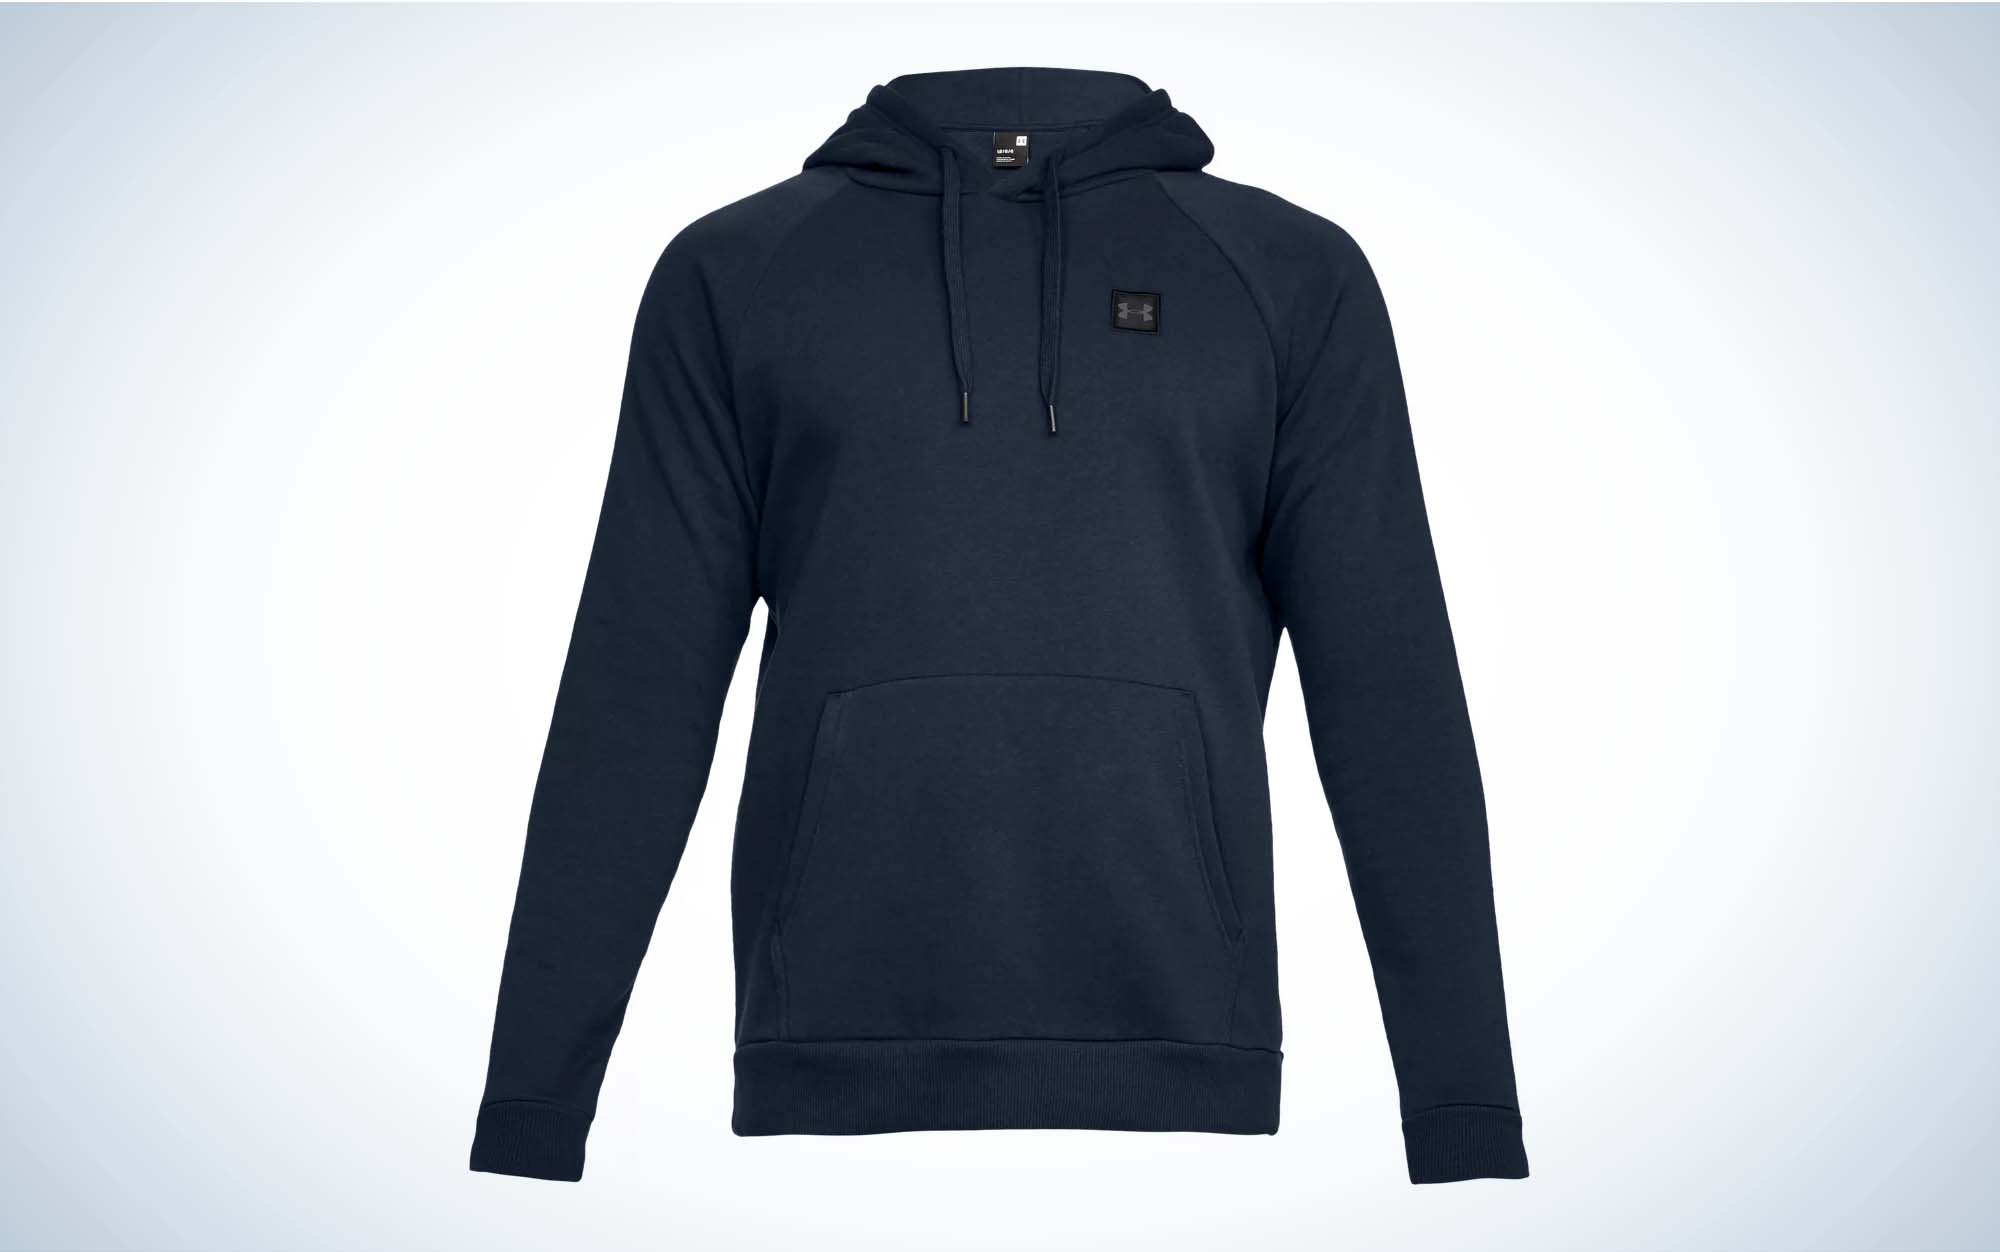 An Under Armor hoodie is the best Bass Pro Black Friday deal